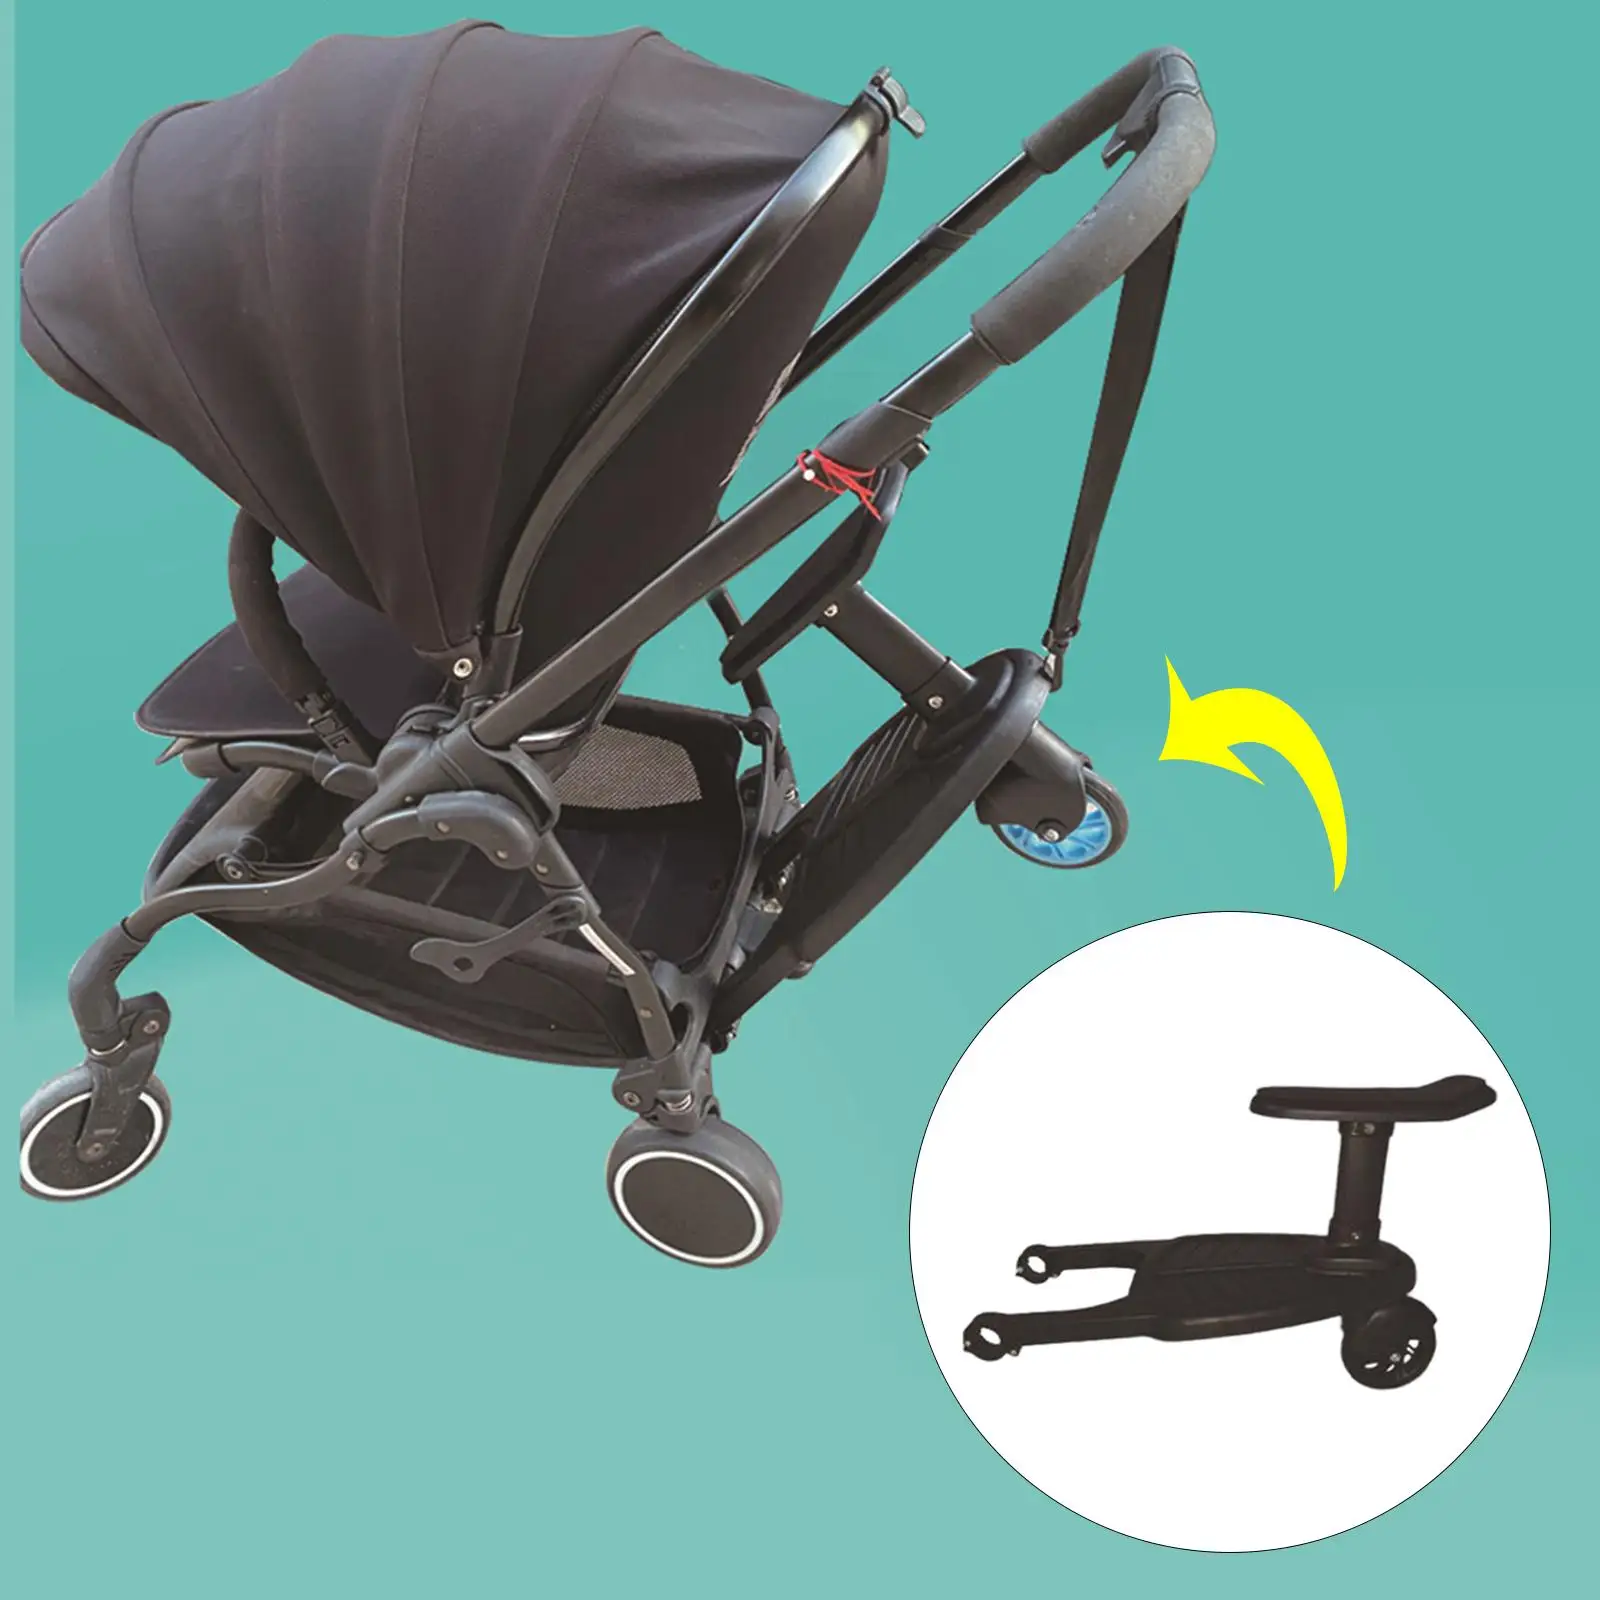 Buggy Second Child Pushchair Standing Plate Seat Child Kids Standing Plate with Seat Stroller Board for Most Brands of Strollers